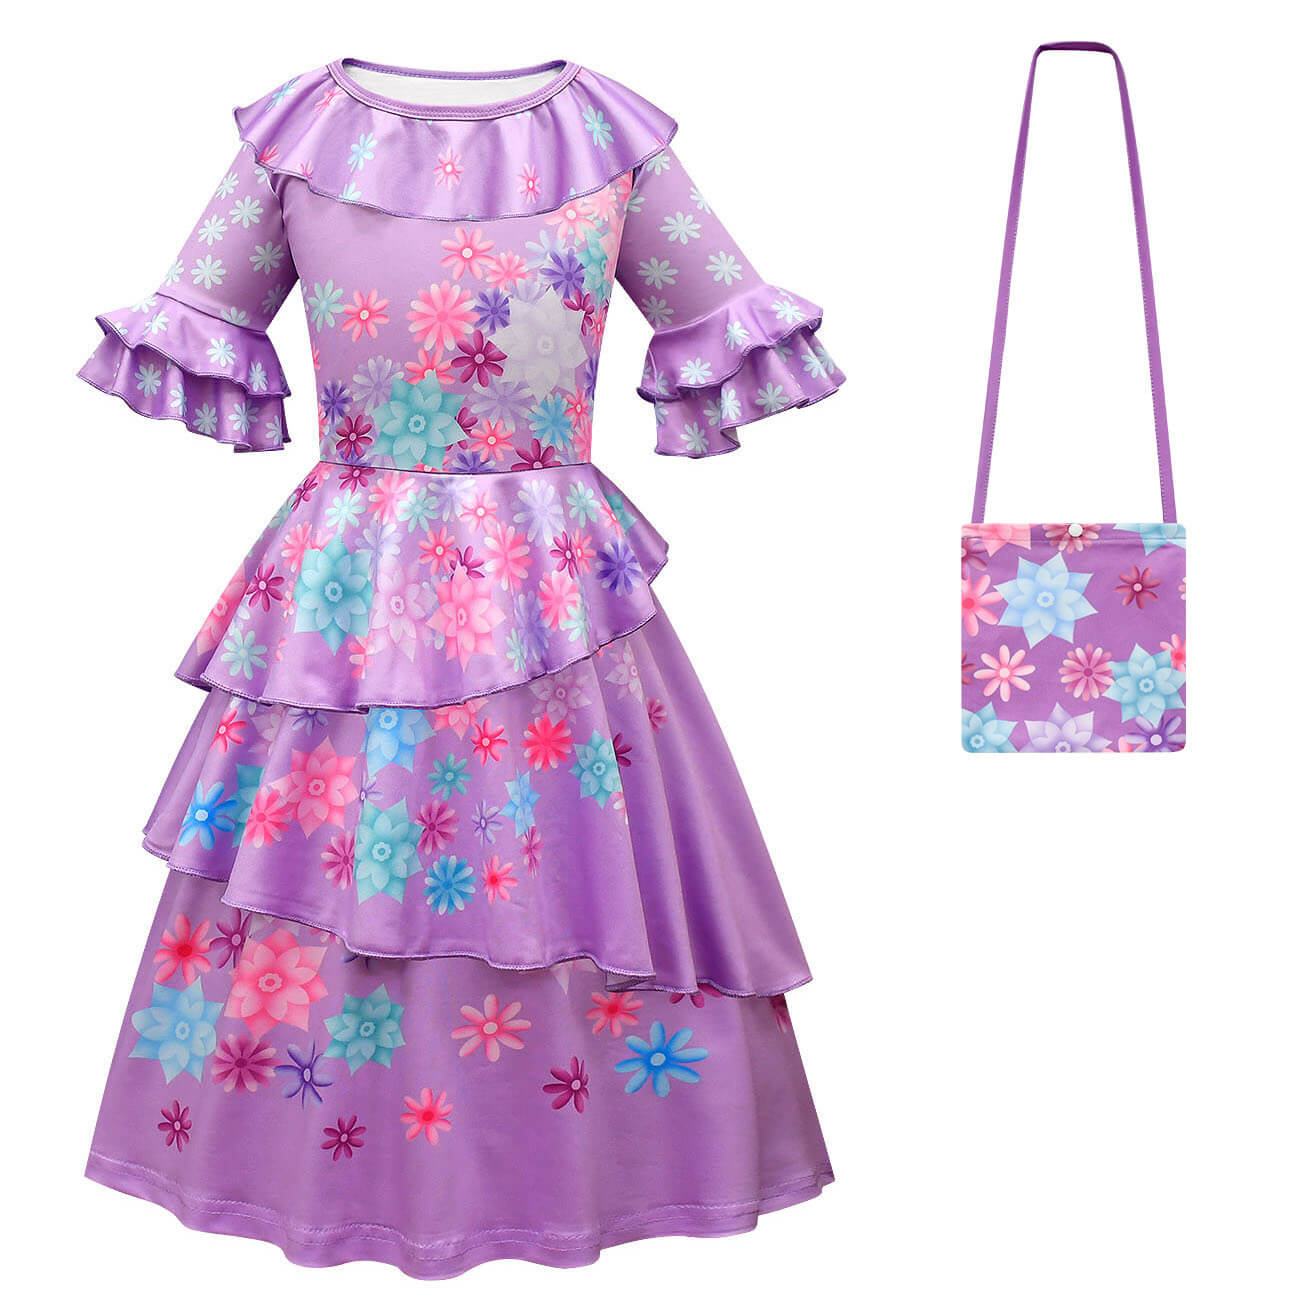 Girls Isabela Party Dress Perfect Flower Princess Cosplay Outfit